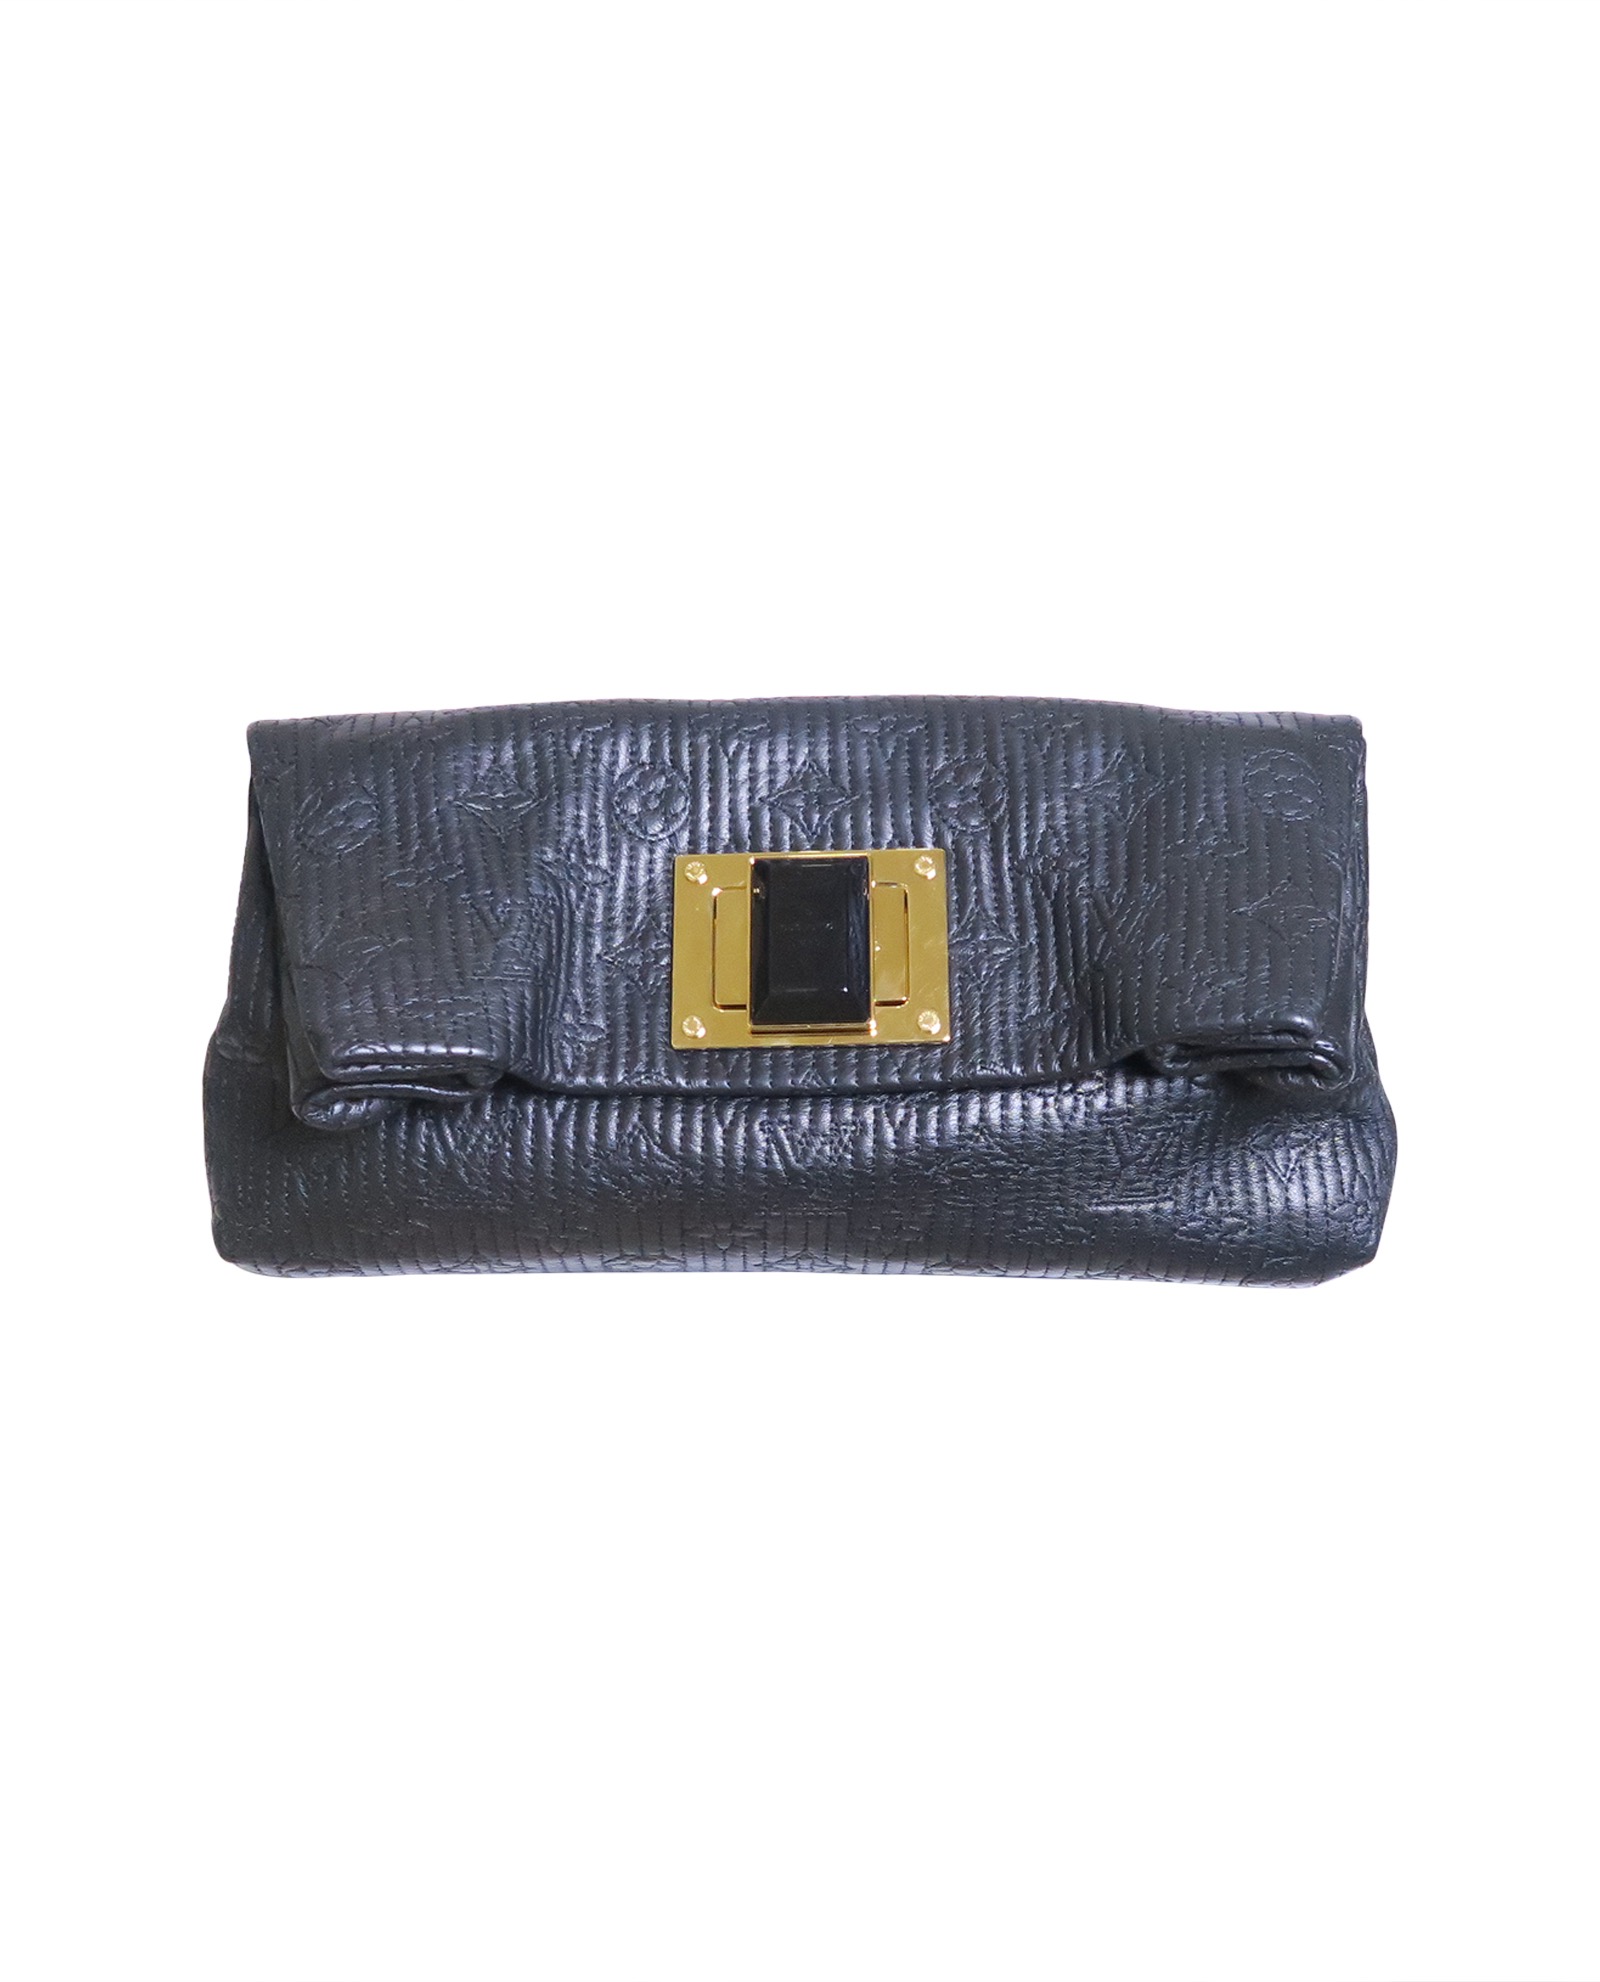 Sell Louis Vuitton Leather Altair Clutch - Black